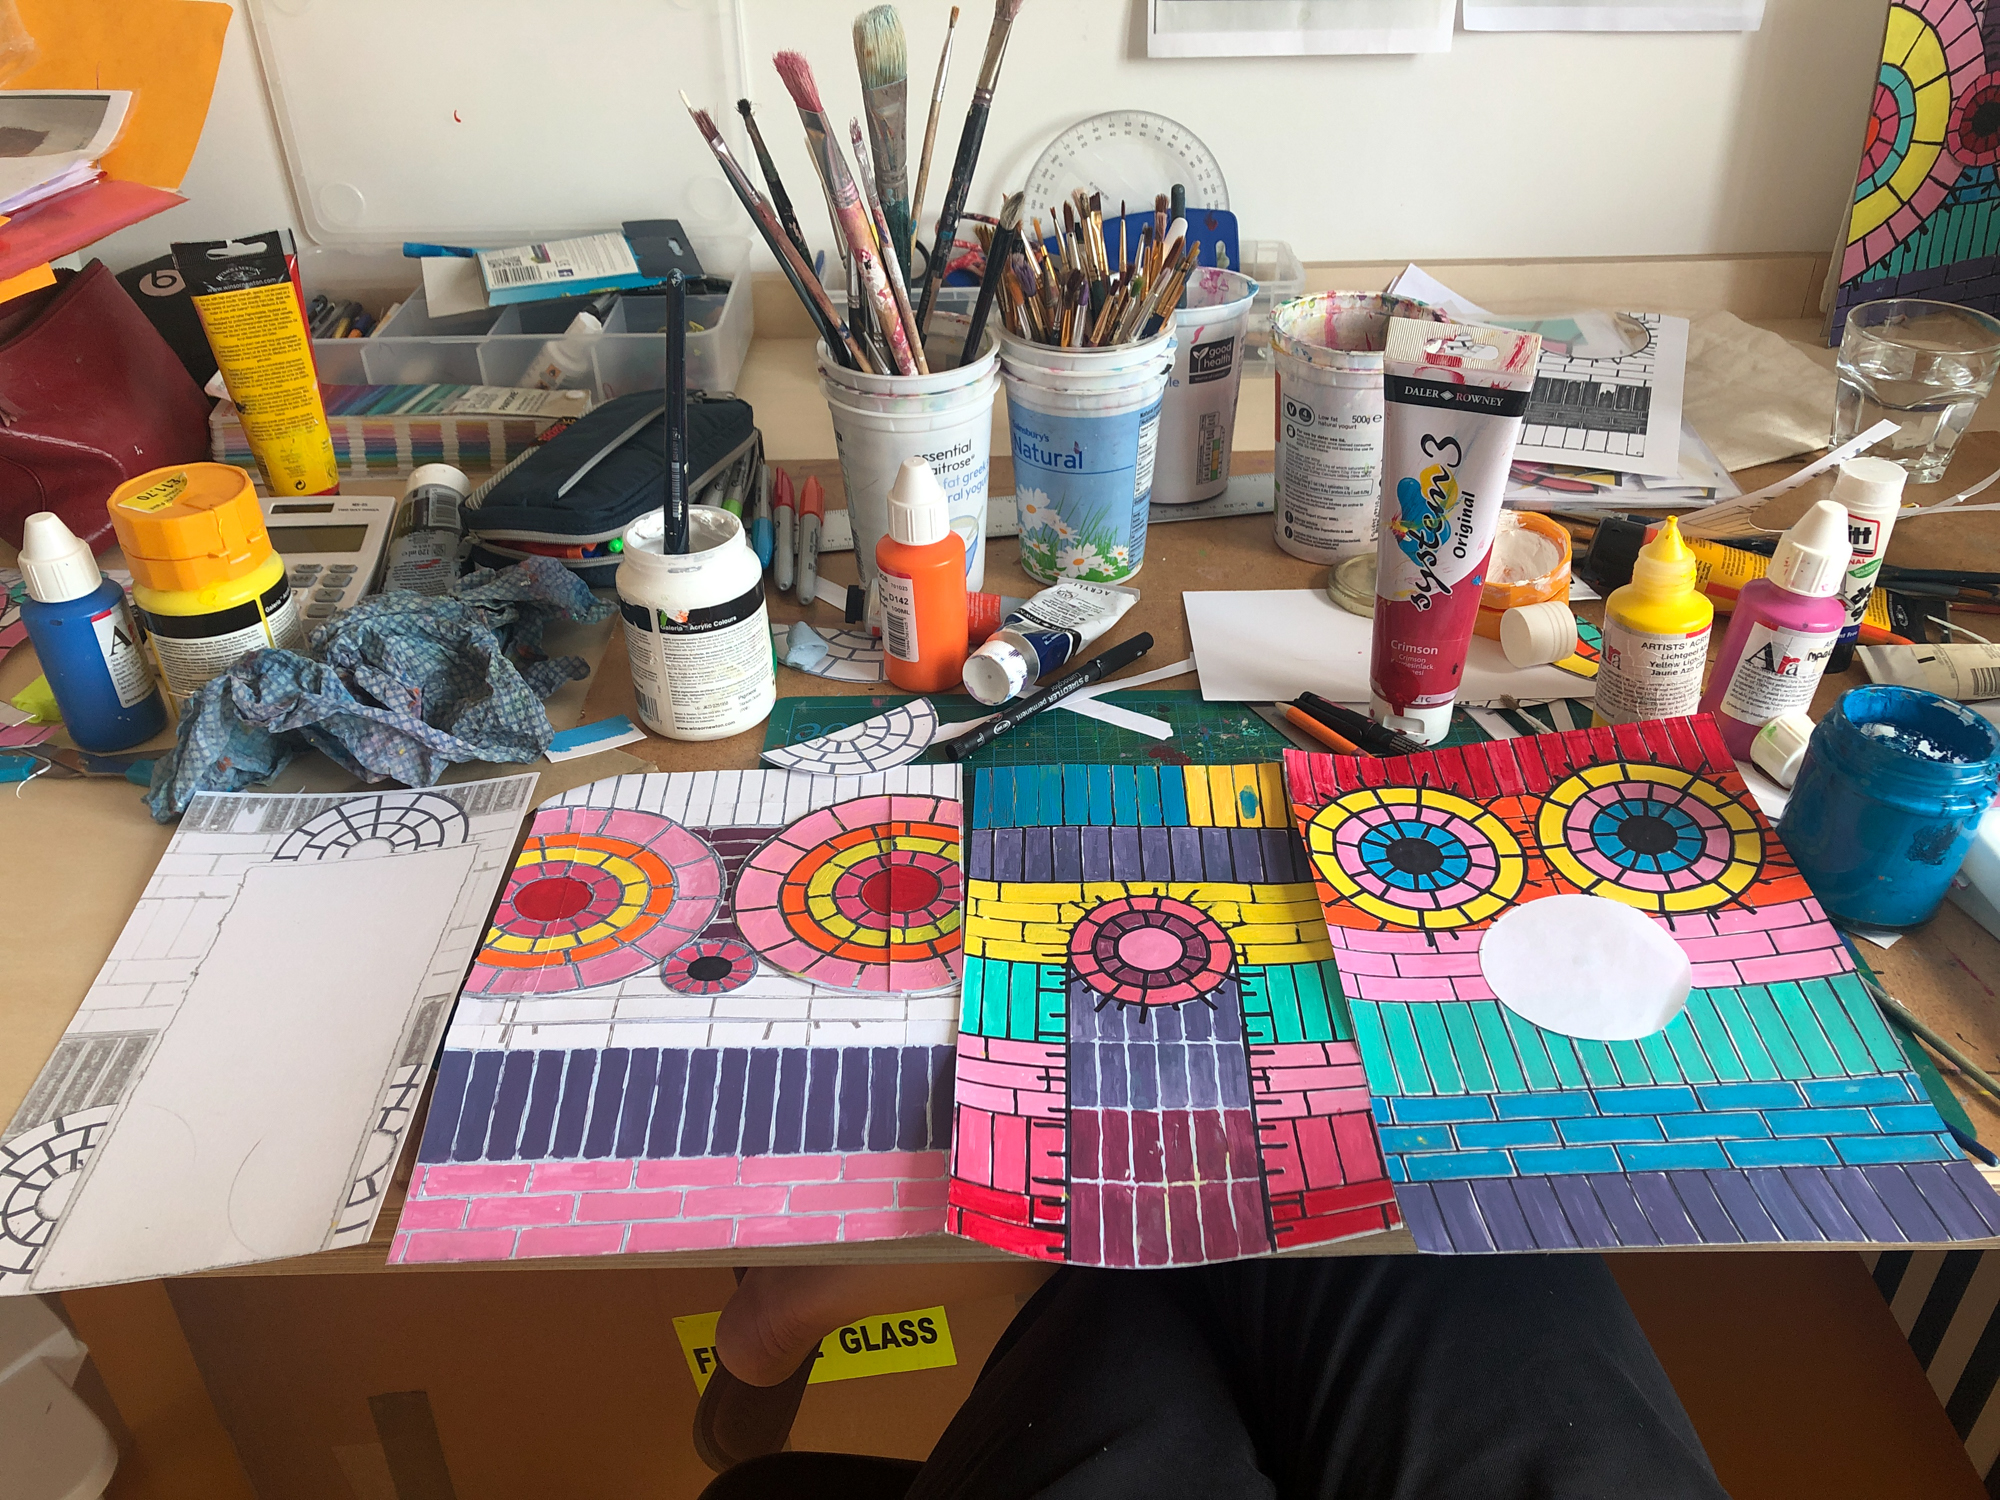 A photograph of a desk with 4 mock drawings of the tiled walls in pink, red, purple and blue. On the desk are several pots filled with paintbrushes, stacks of pens, and multiple tubes of paint.